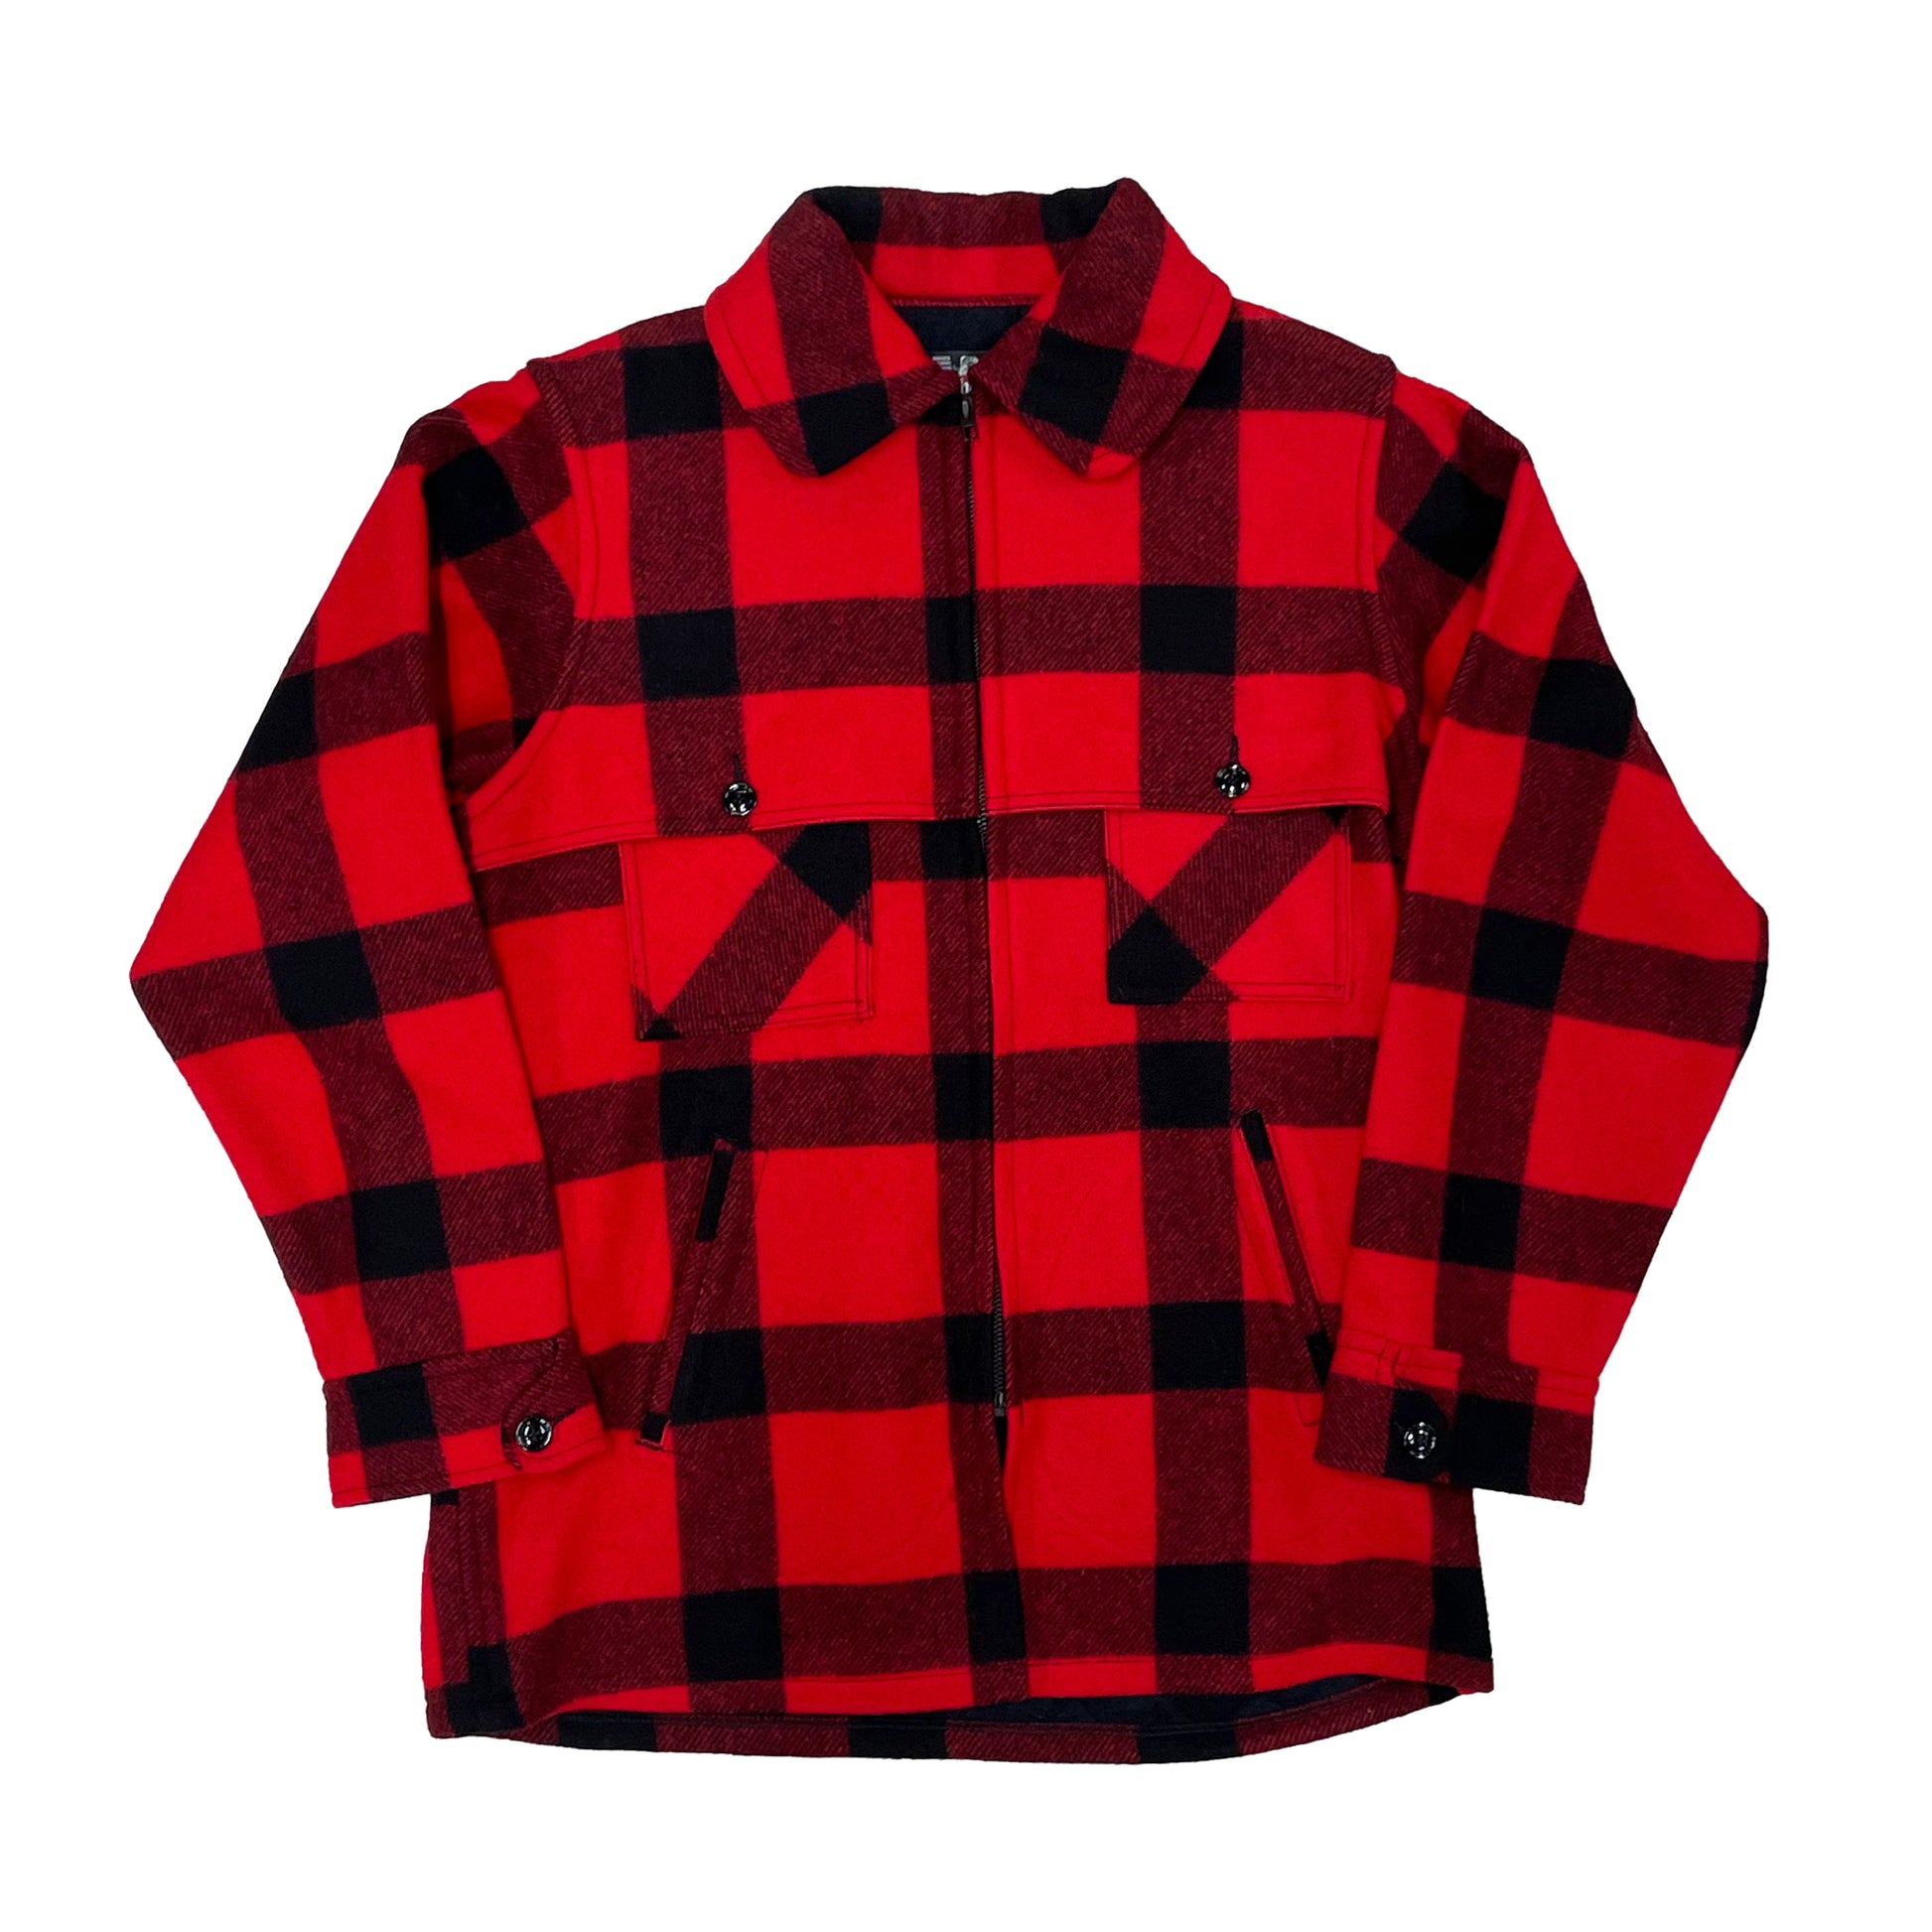 Johnson Woolen Mills Cruiser jacket in Red and black buffalo check 